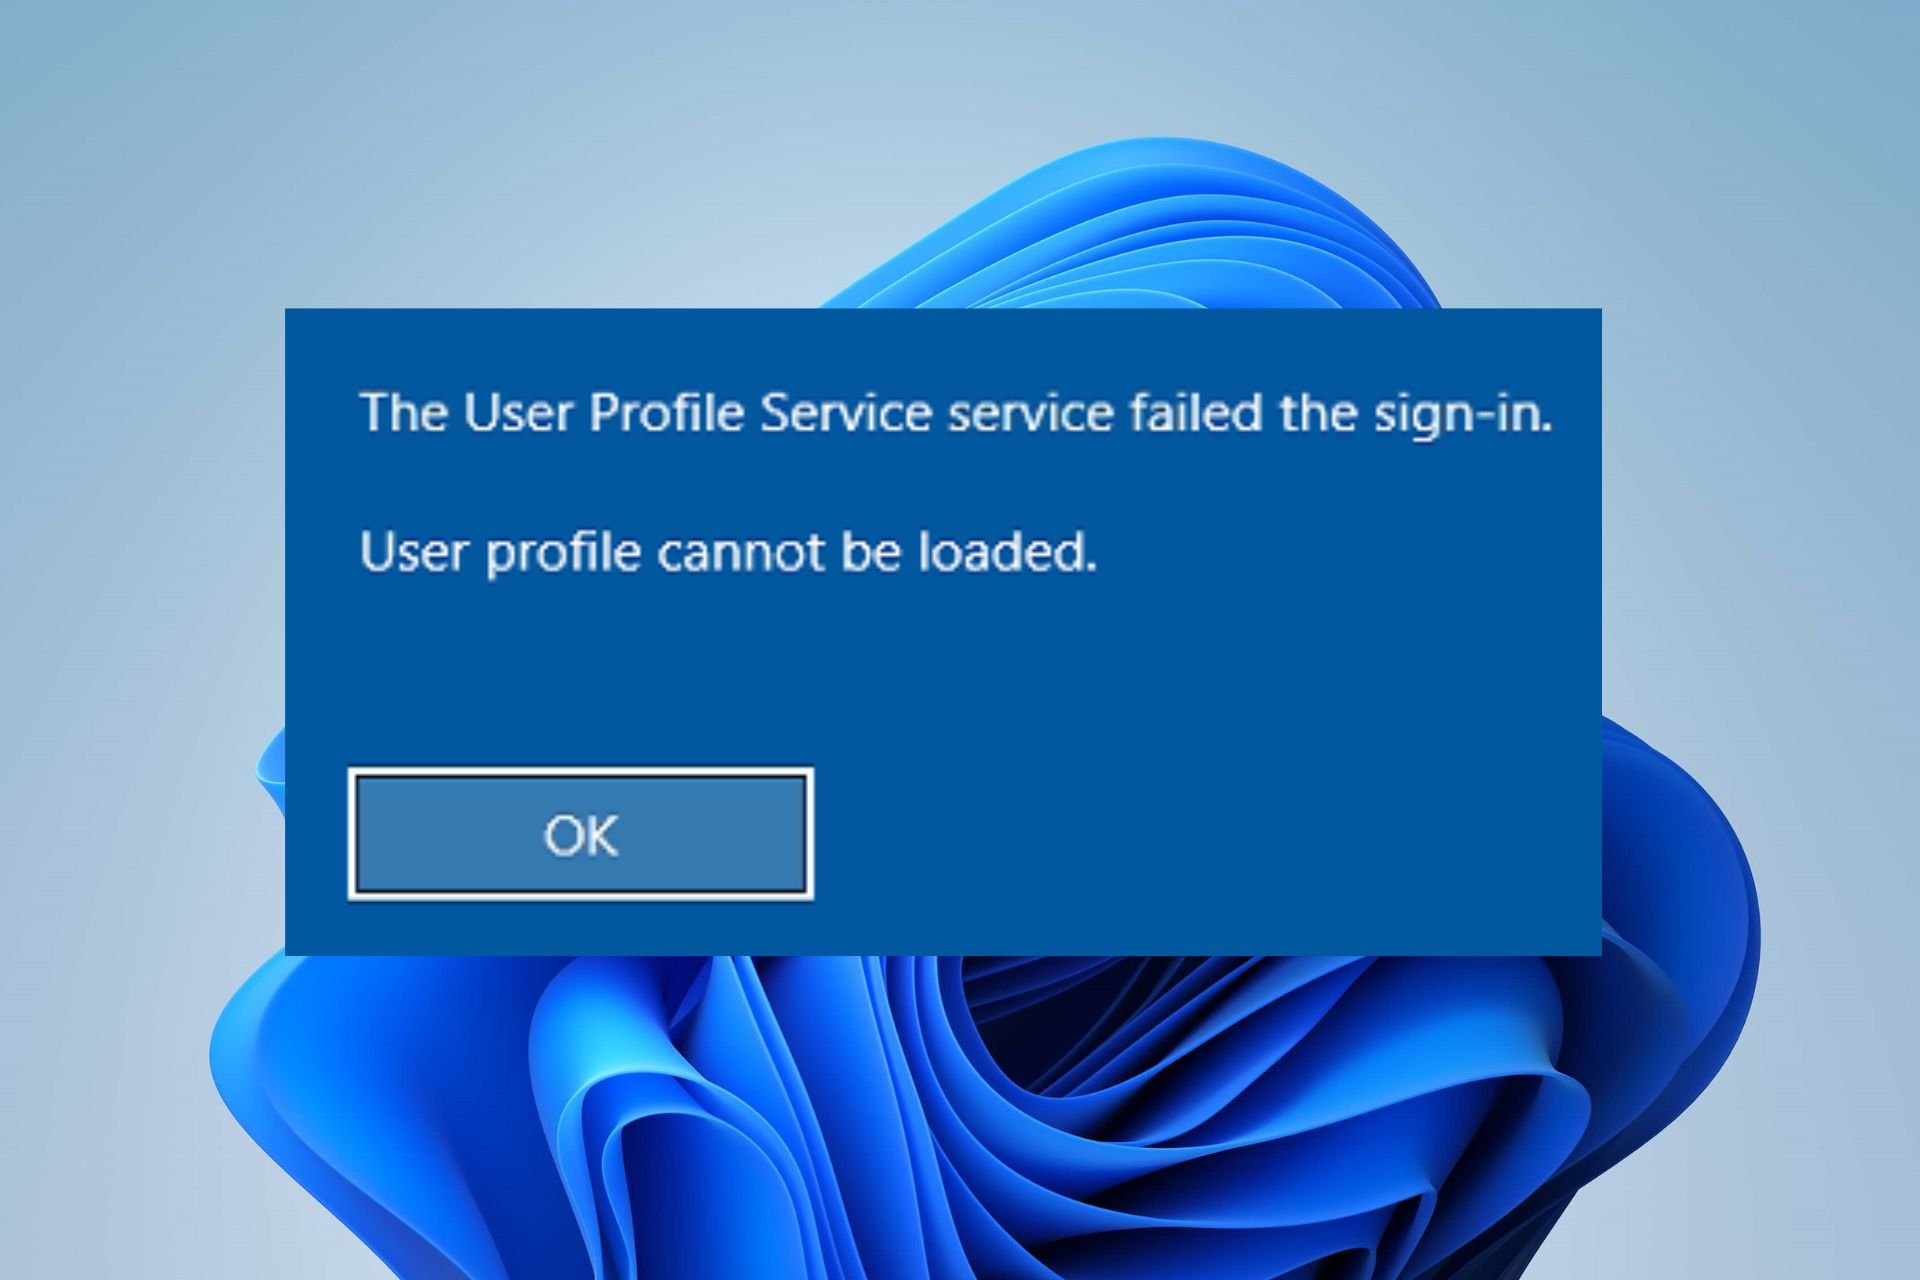 user profile cannot be loaded